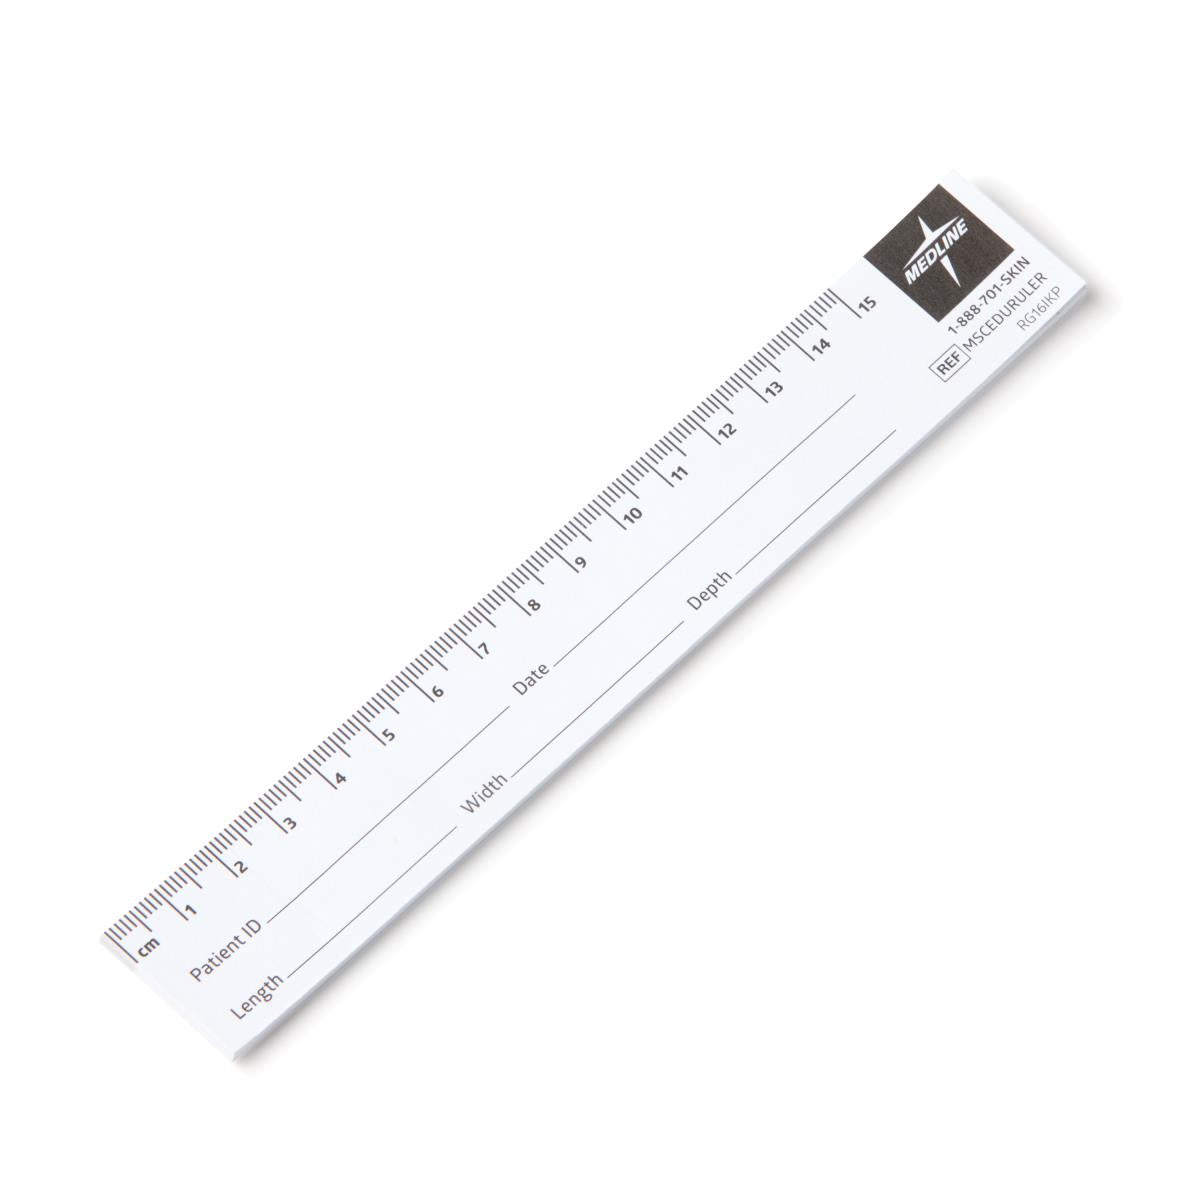 Wound Measuring Paper Rulers (Box of 250)